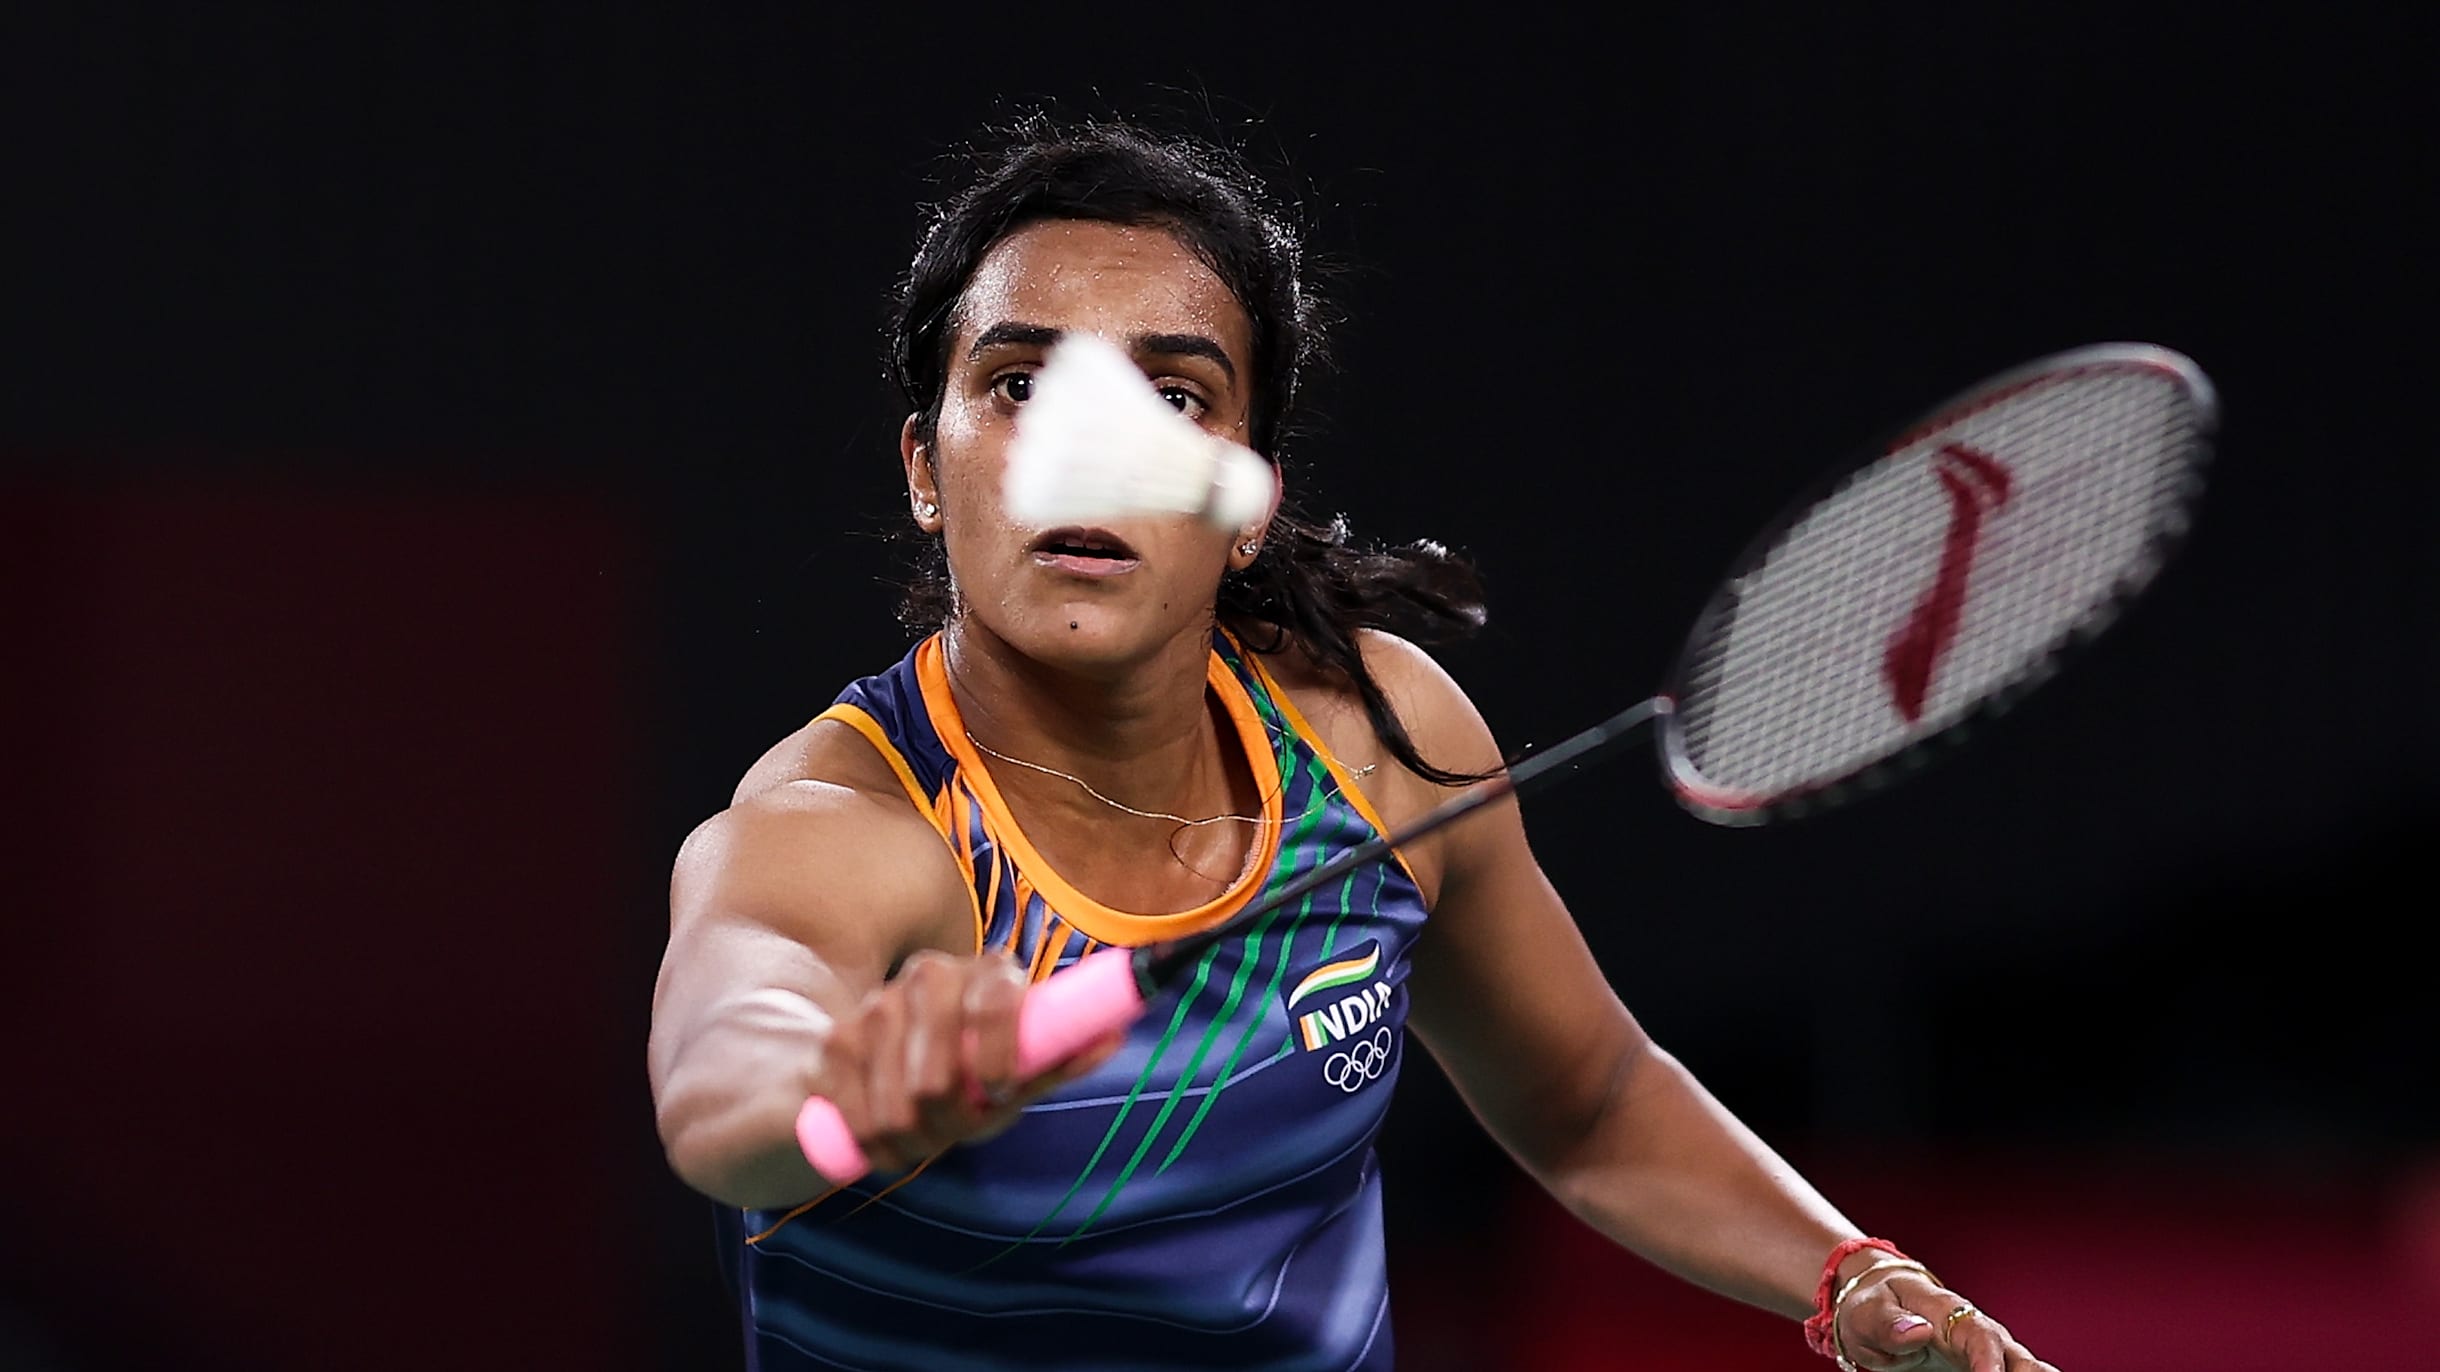 Commonwealth Games 2022 badminton India vs Pakistan on the cards in mixed team event